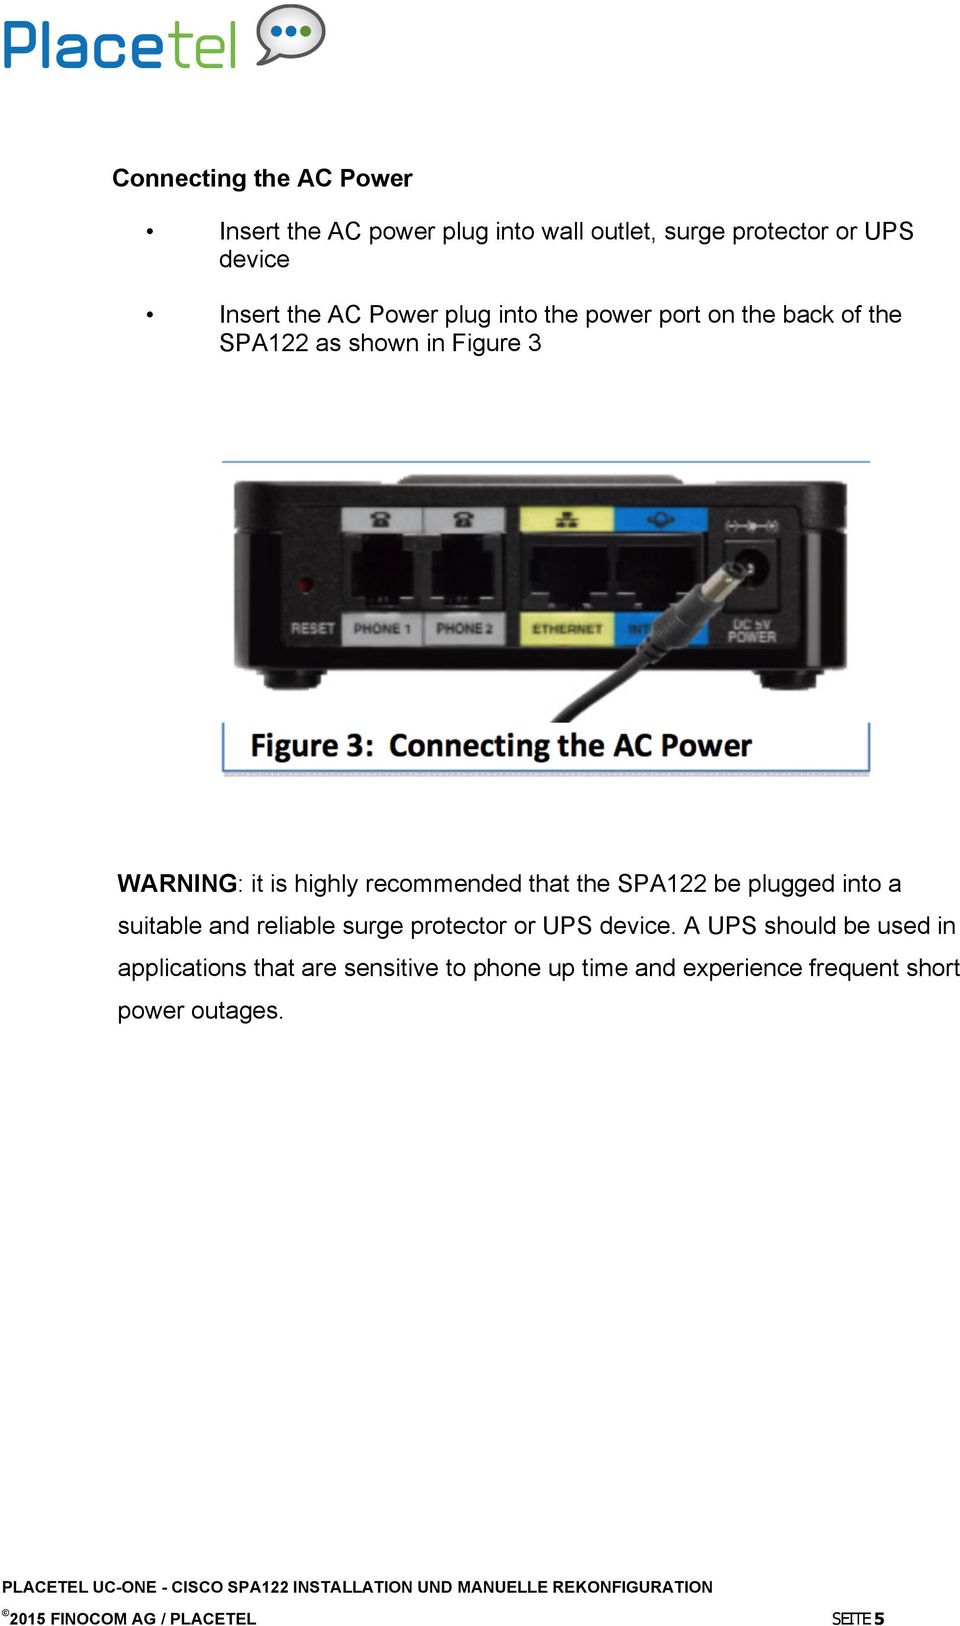 that the SPA122 be plugged into a suitable and reliable surge protector or UPS device.